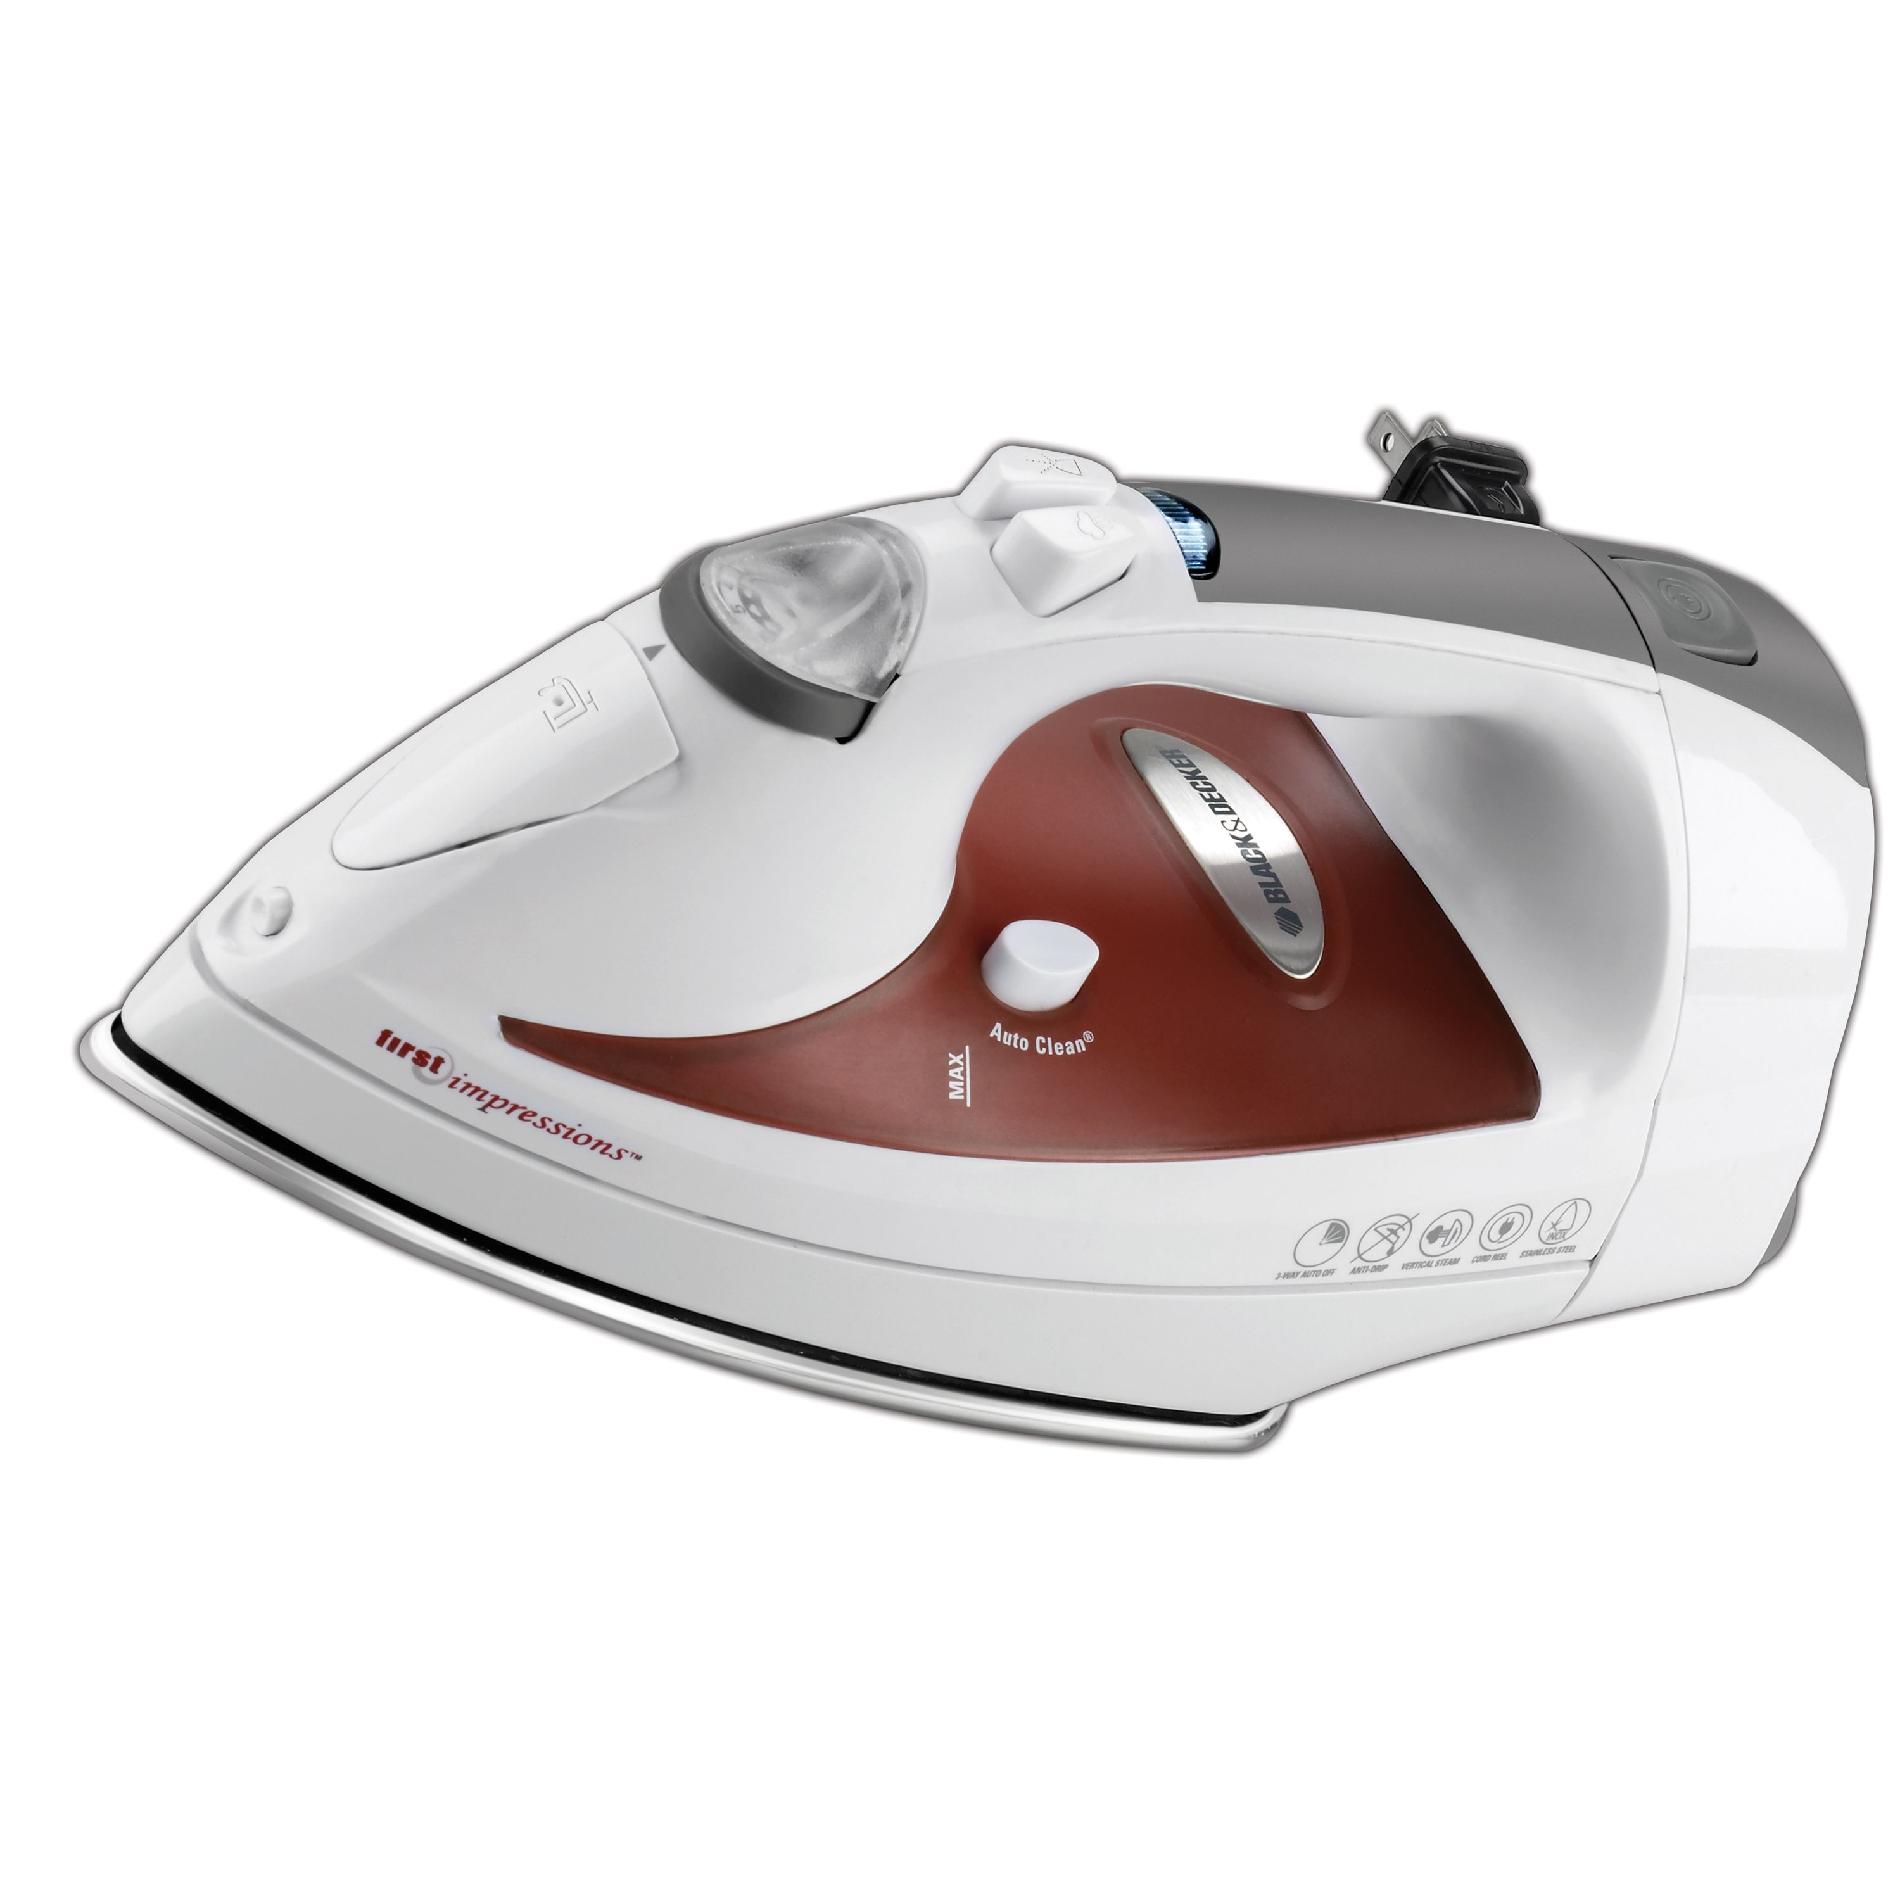 Black & Decker First Impressions Clothes Iron